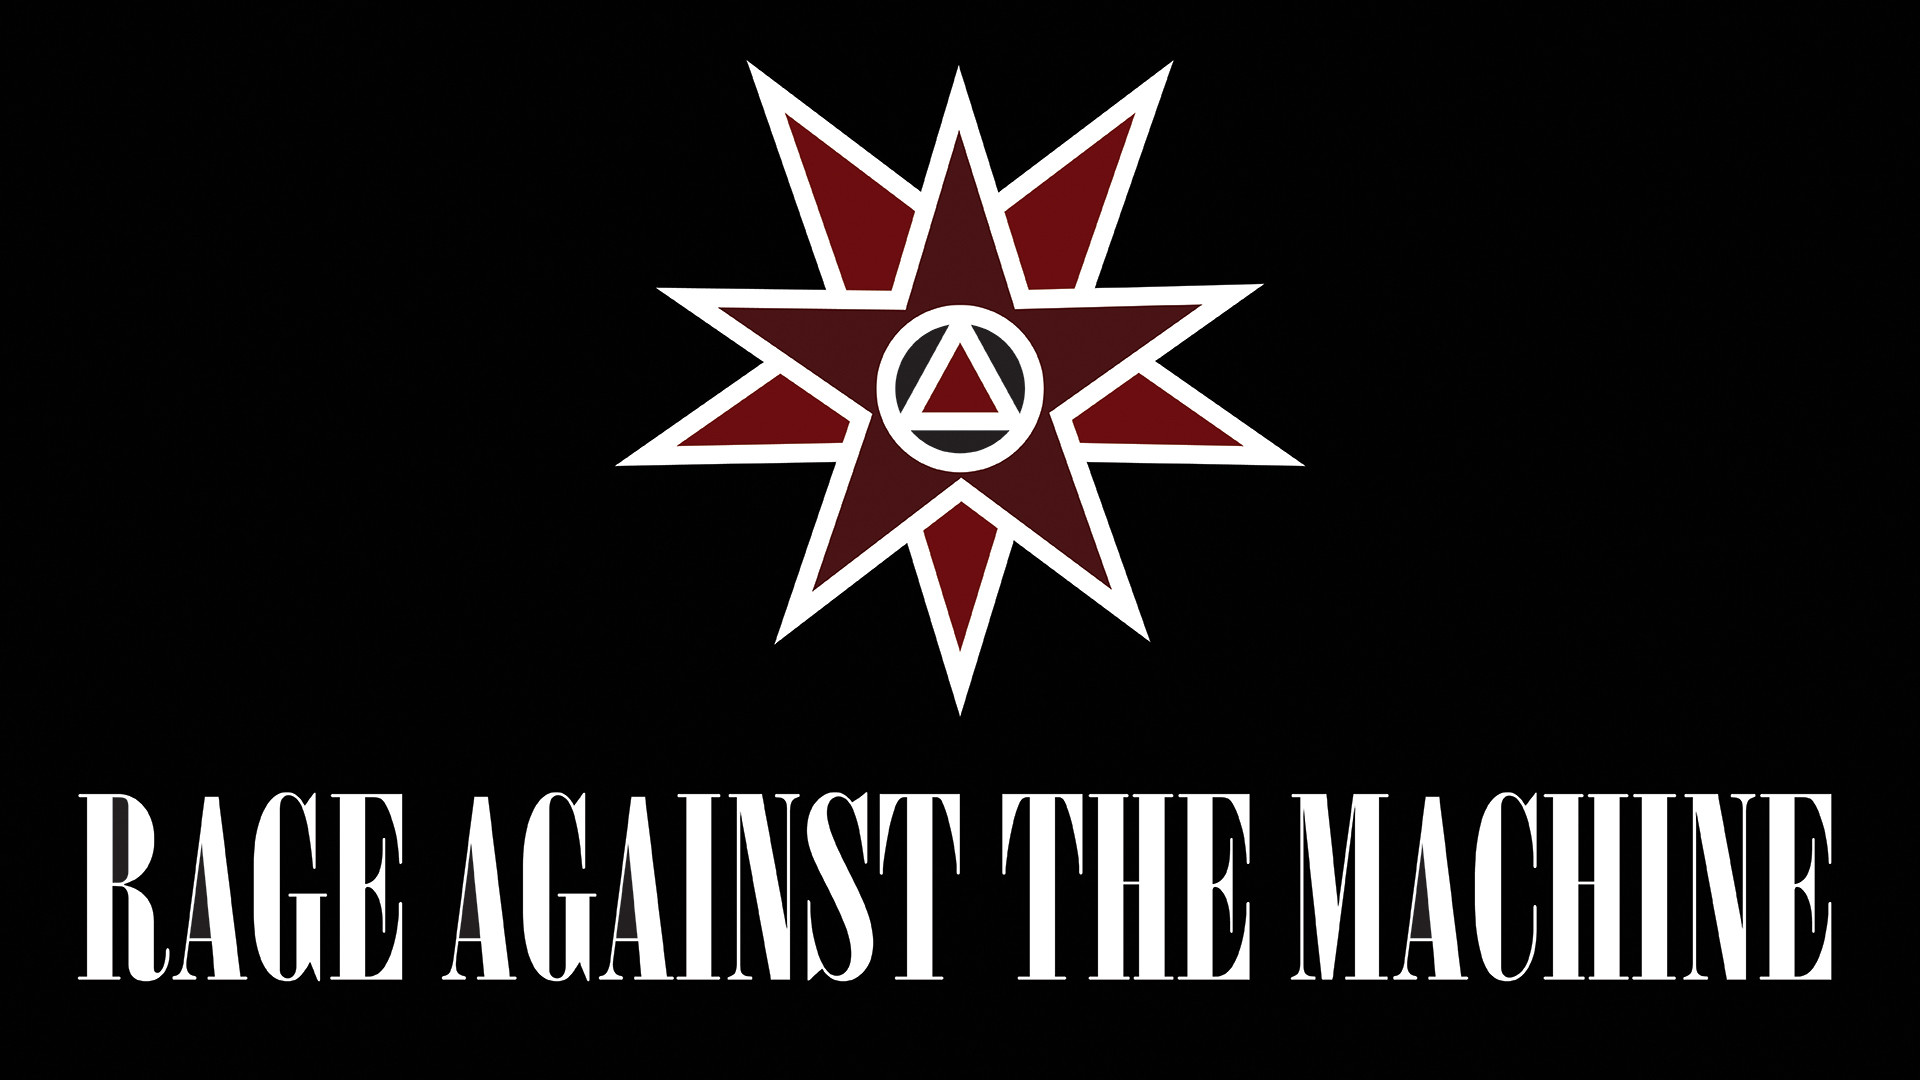 1920x1080 ... 1920 Rage Against The Machine Background by Willberr